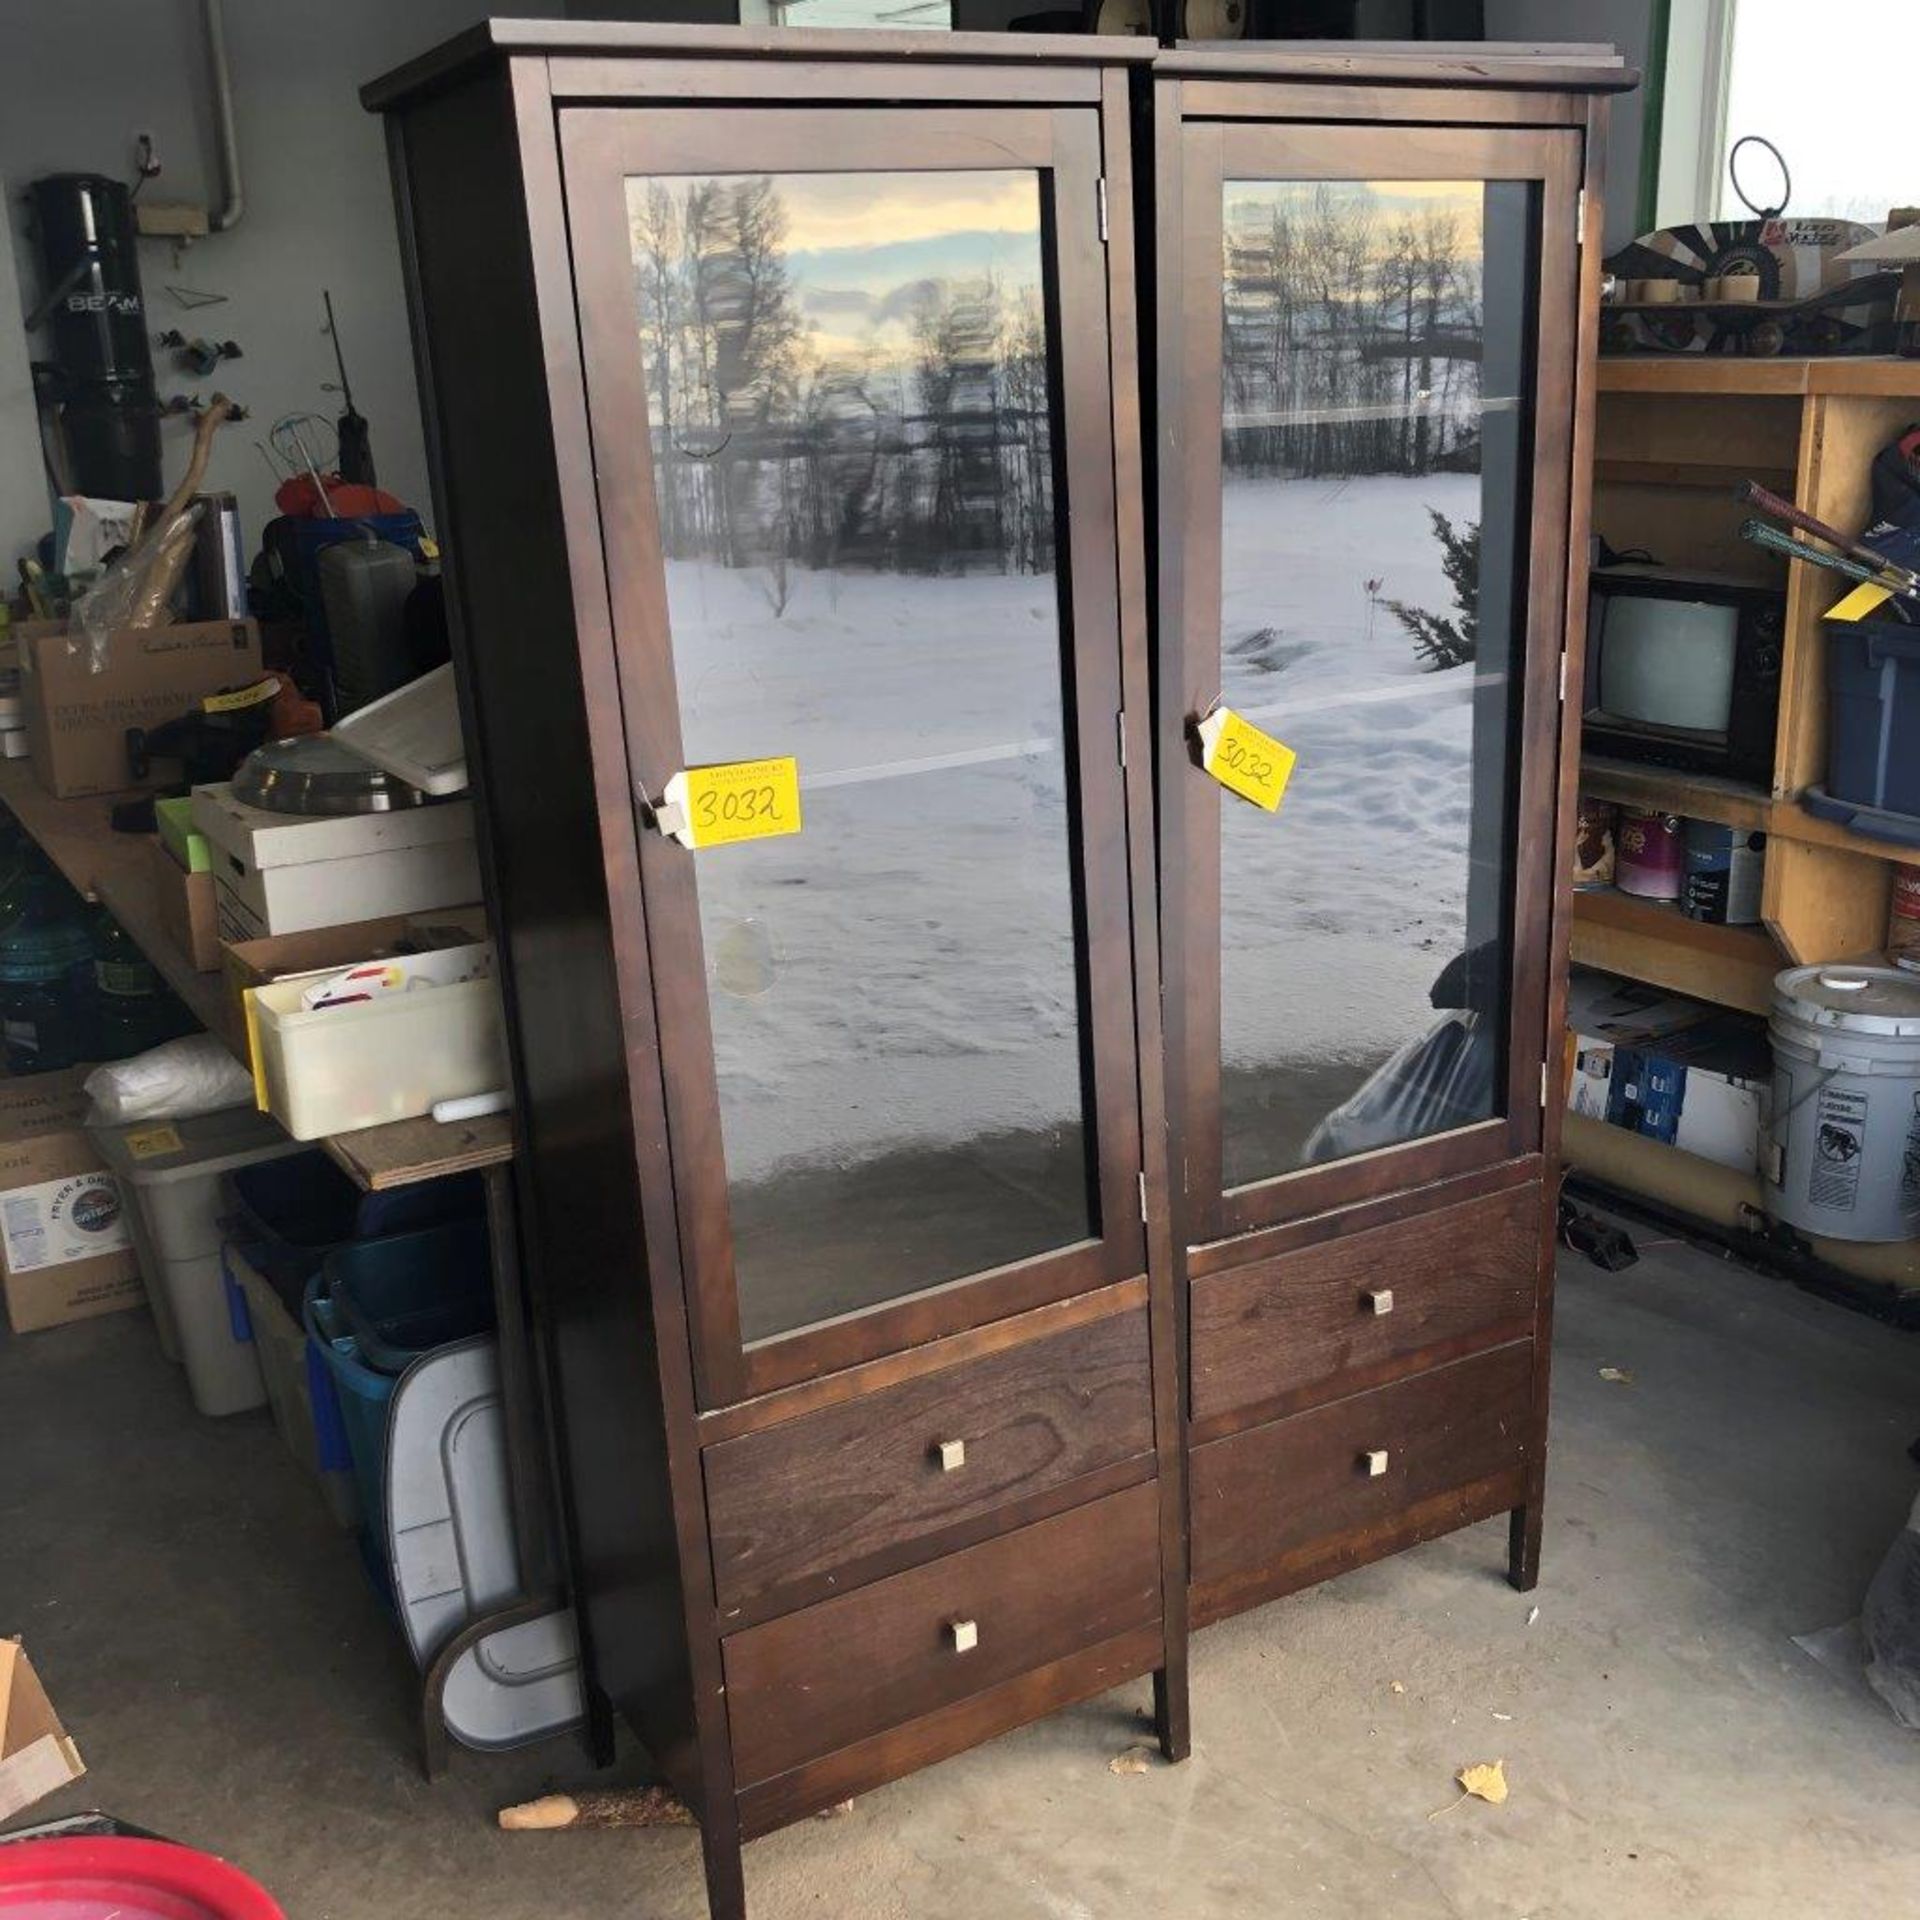 PAIR OF WOODEN GLASS DOOR DISPLAY CABINETS W/ 2-DRAWERS PER CABINET